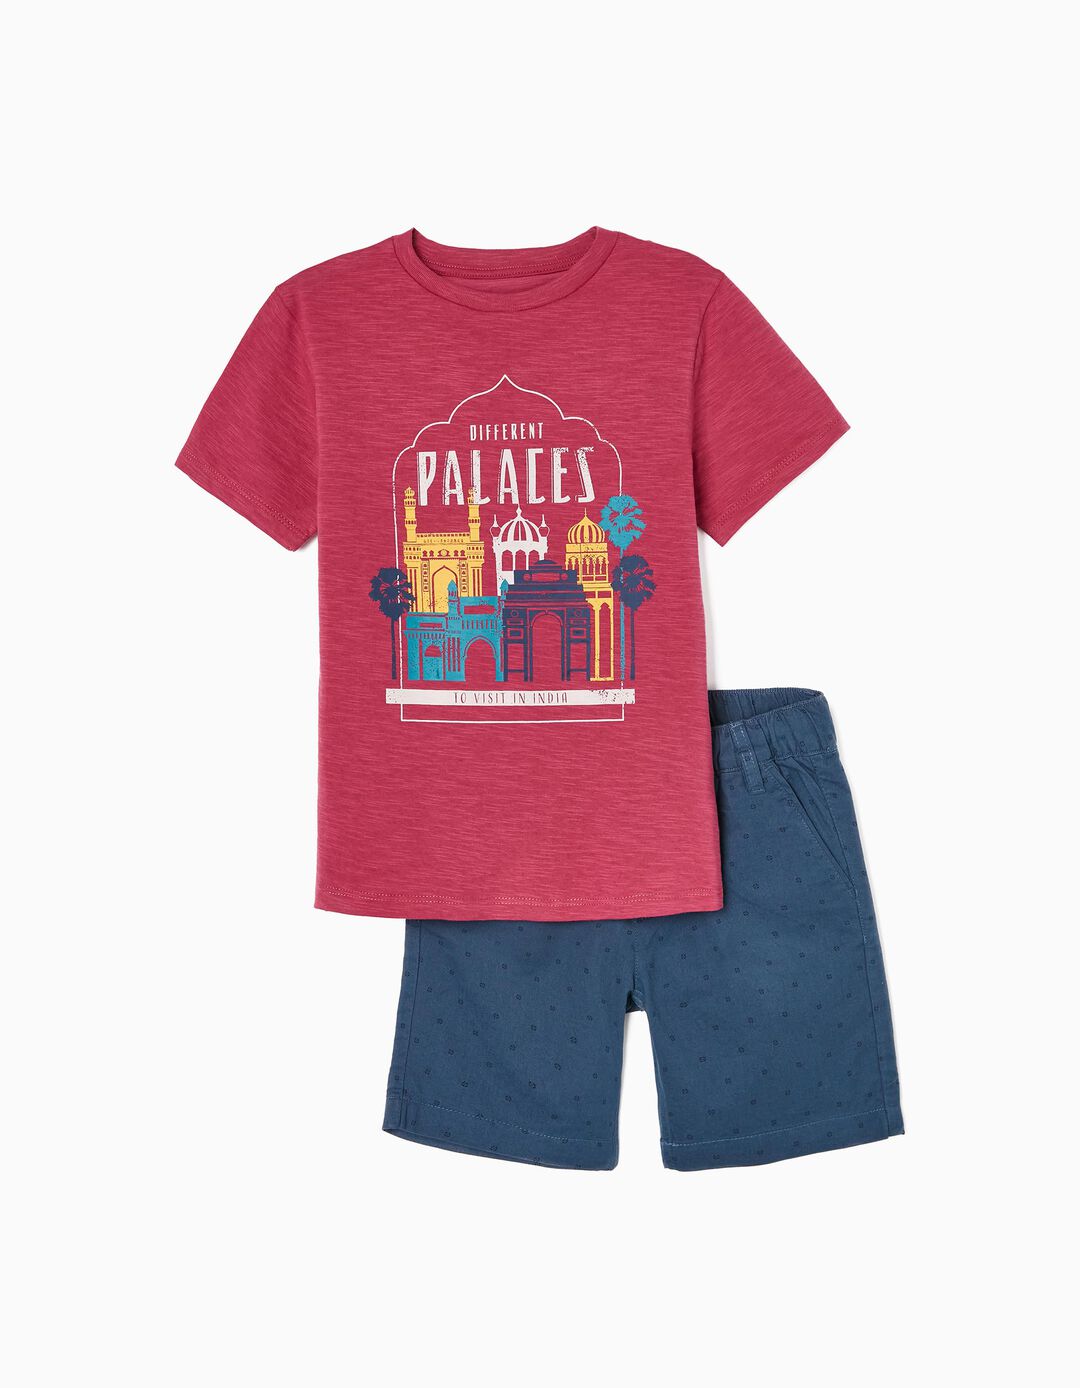 Cotton T-shirt + Shorts for Boys 'Indian Palaces', Red/Blue